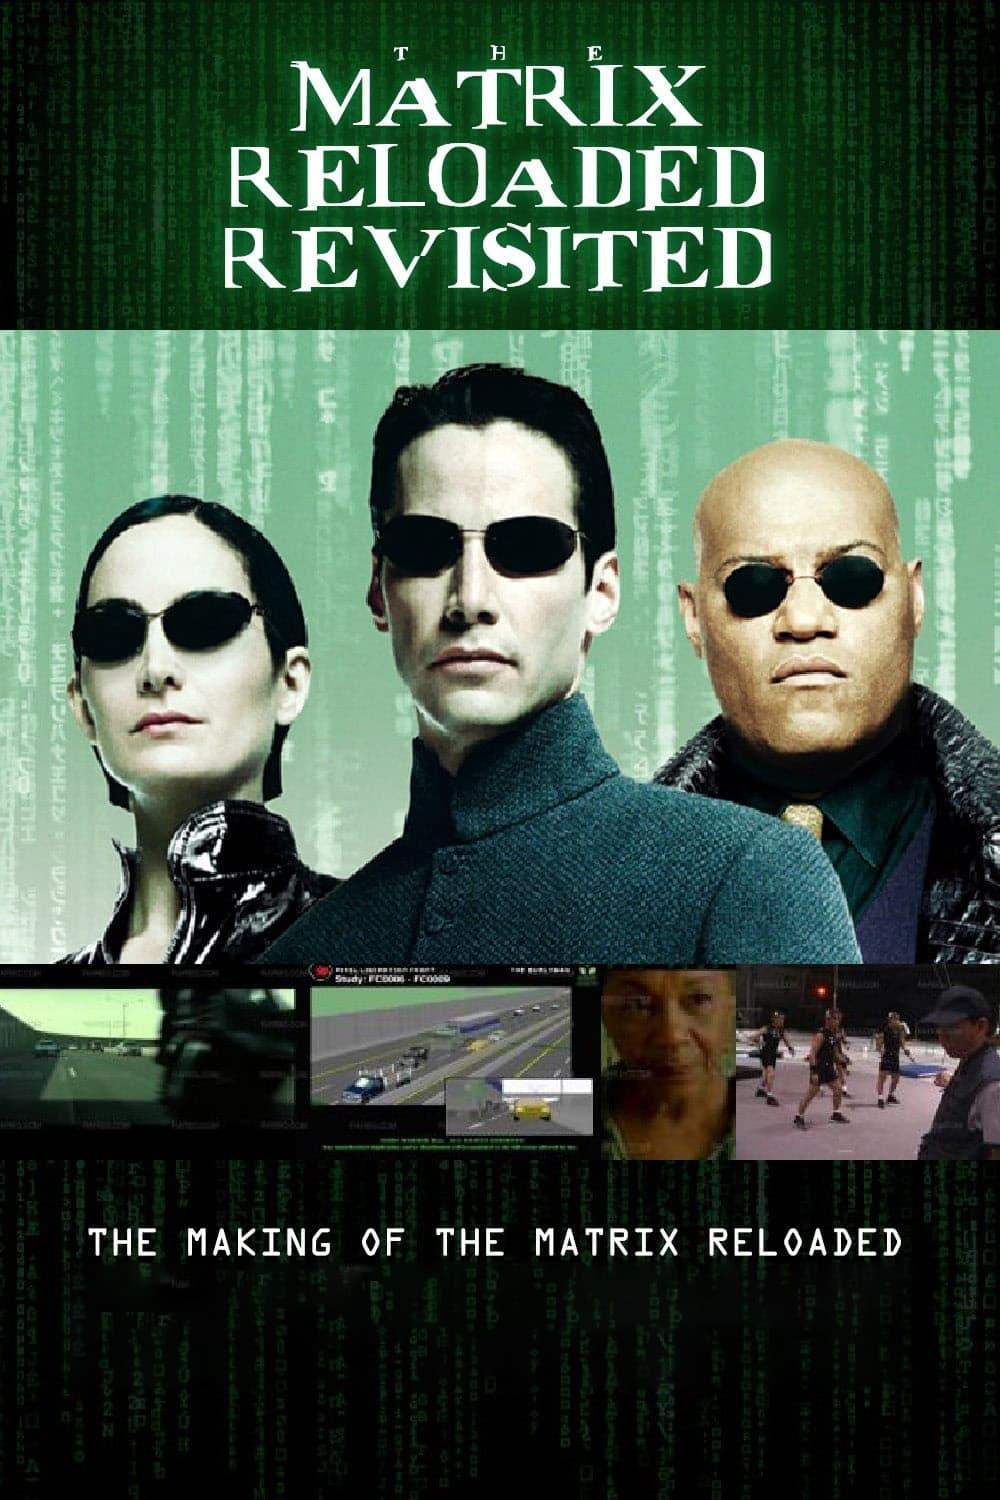 The Matrix Reloaded Revisited poster